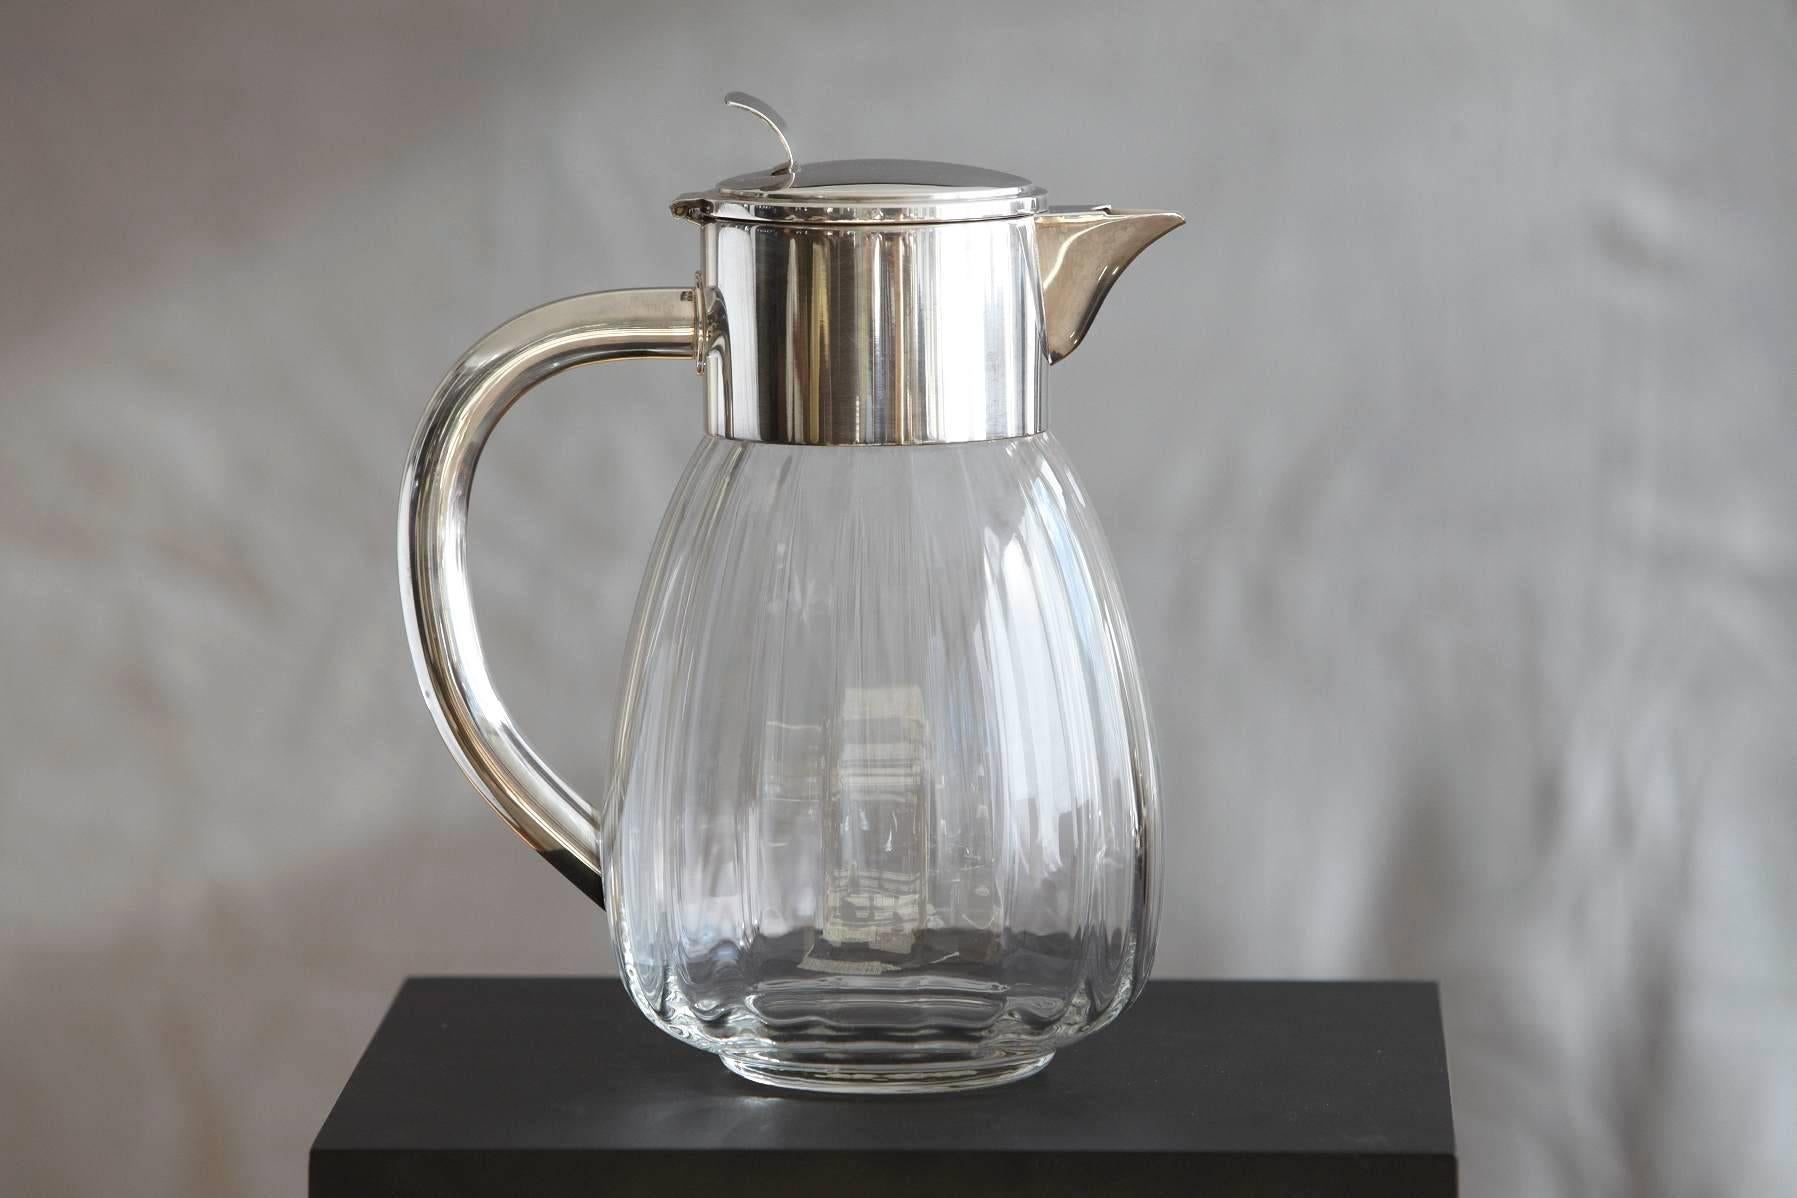 Vintage midcentury silver plate lidded and glass water carafe, made in Germany.

The Eisenberg-Lozano Co based in New York City was founded in 1953 by Arthur Eisenberg and Neal Lozano. The lid is marked with the Eisenberg-Lozano company's hallmark